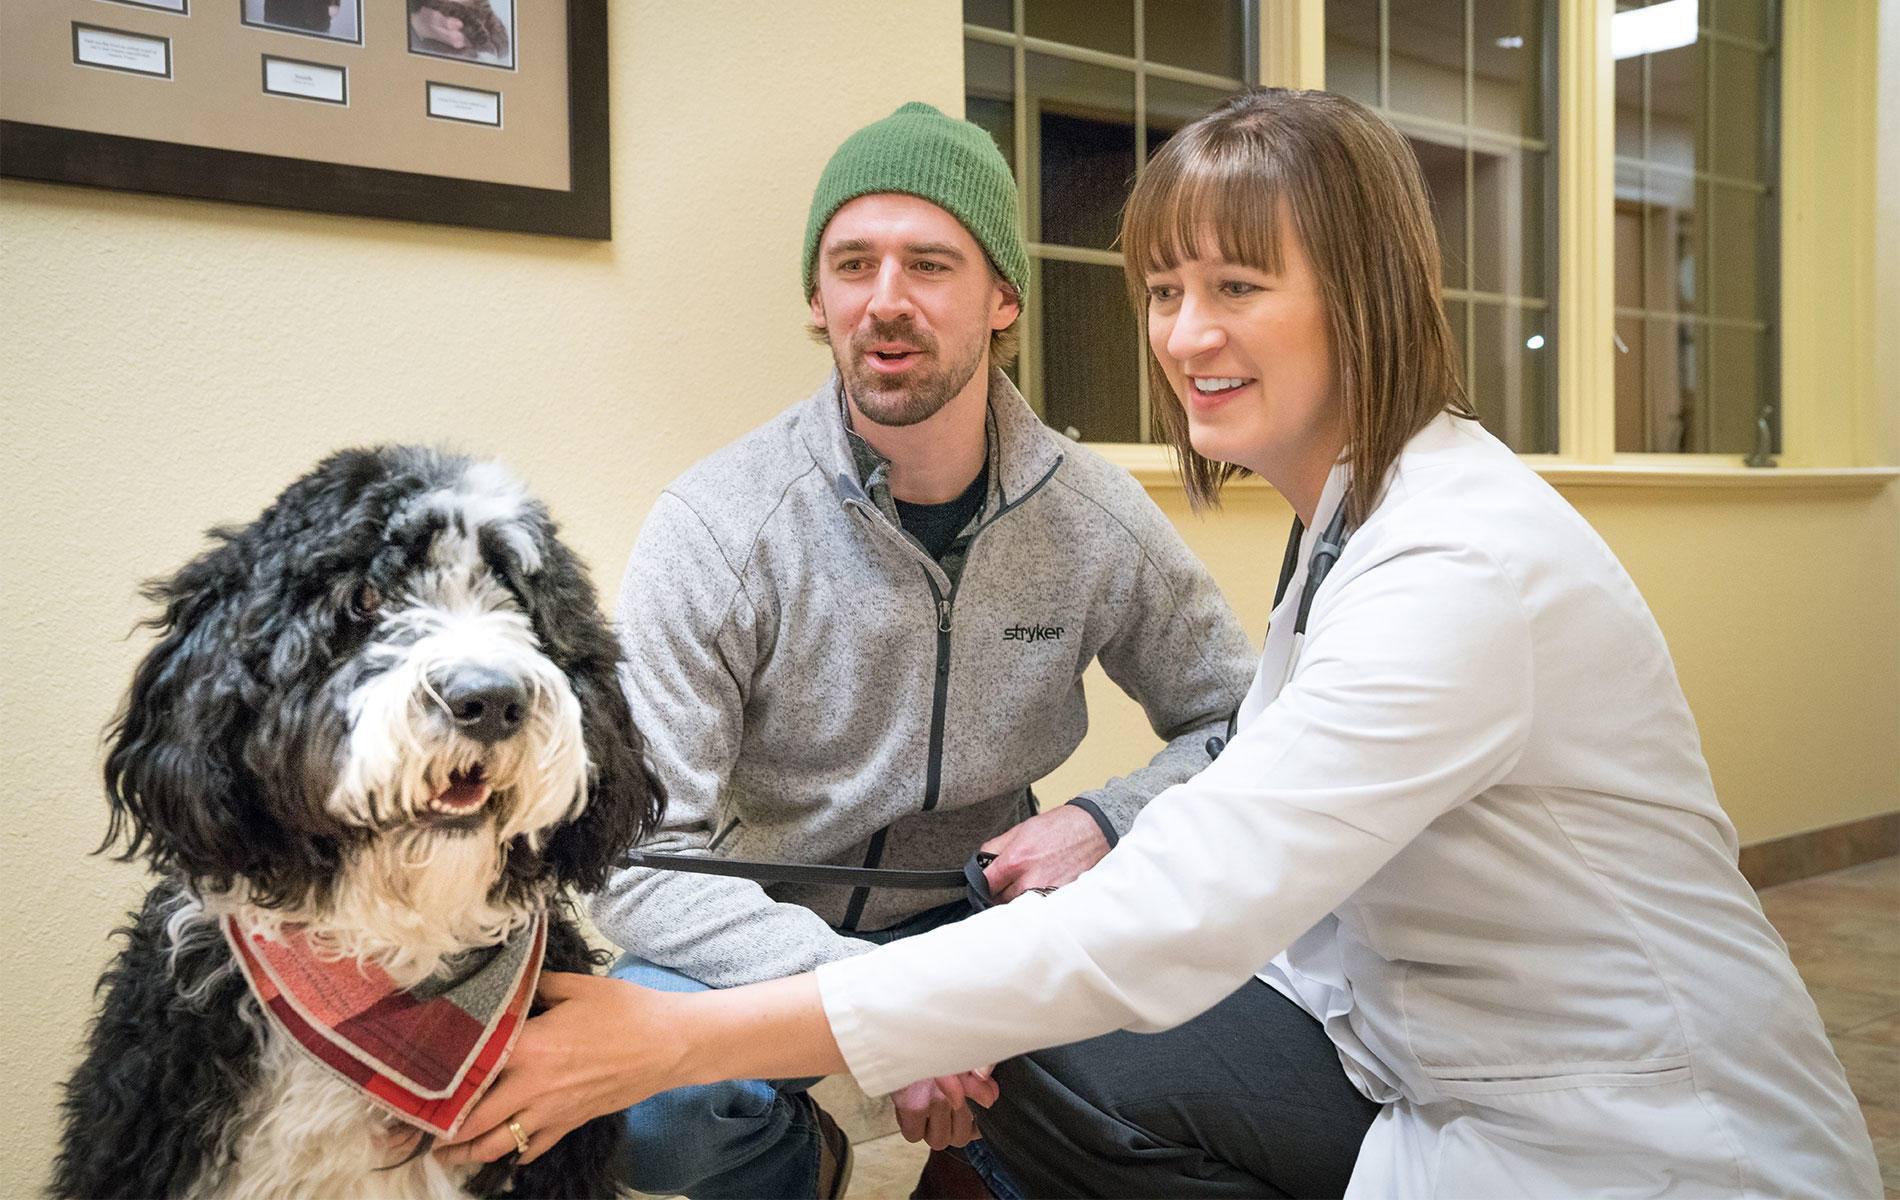 Dr. Amy Haarstad is specialized in providing consultation, examination, and veterinary dermatology services. From allergies to ear disease management, Dr. Amy Haarstad is fully equipped and ready to help.